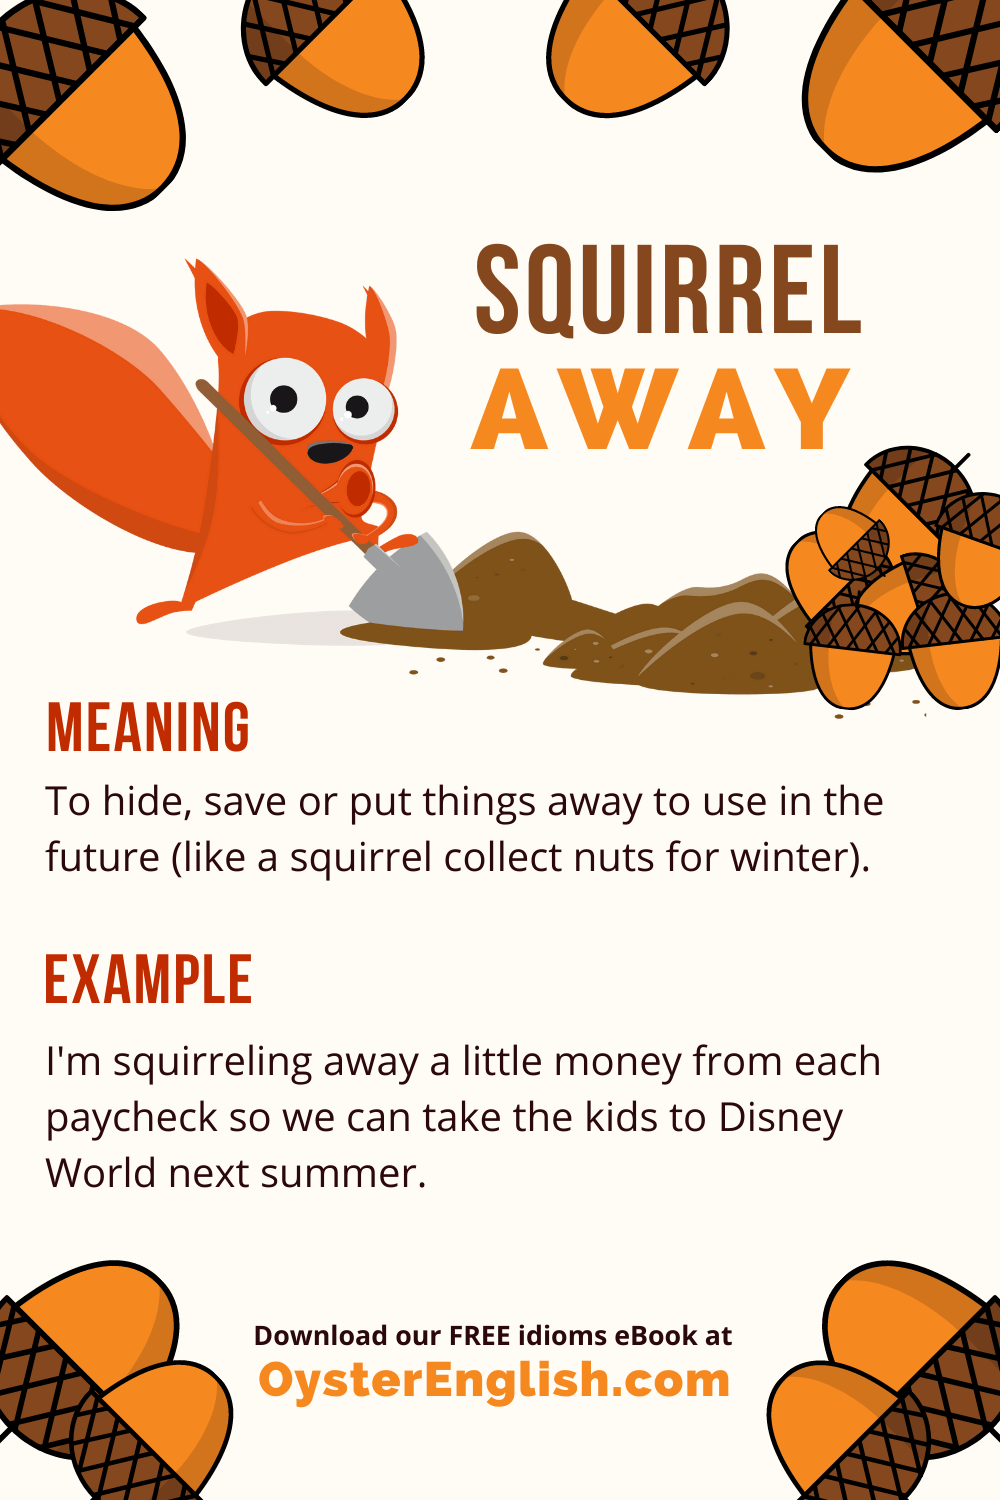 A squirrel is digging a hole to bury a pile of acorns (idiom "squirrel away"). Example: I'm squirreling away money each paycheck so we can take the kids to Disney next summer.